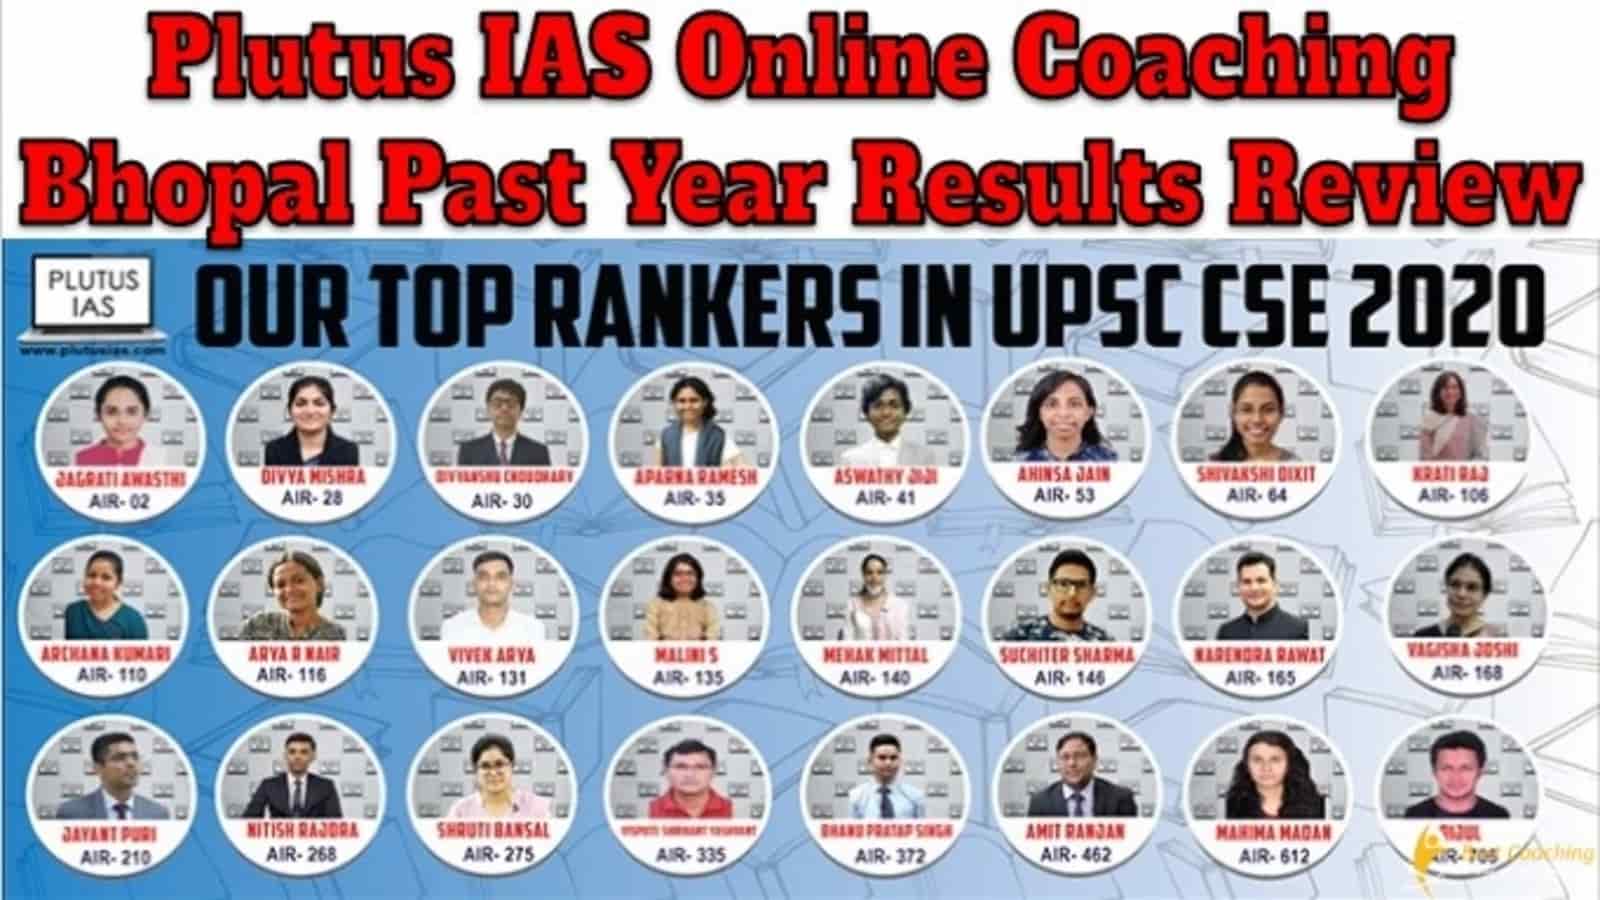 Plutus IAS Online Coaching Bhopal Past Year Result Review